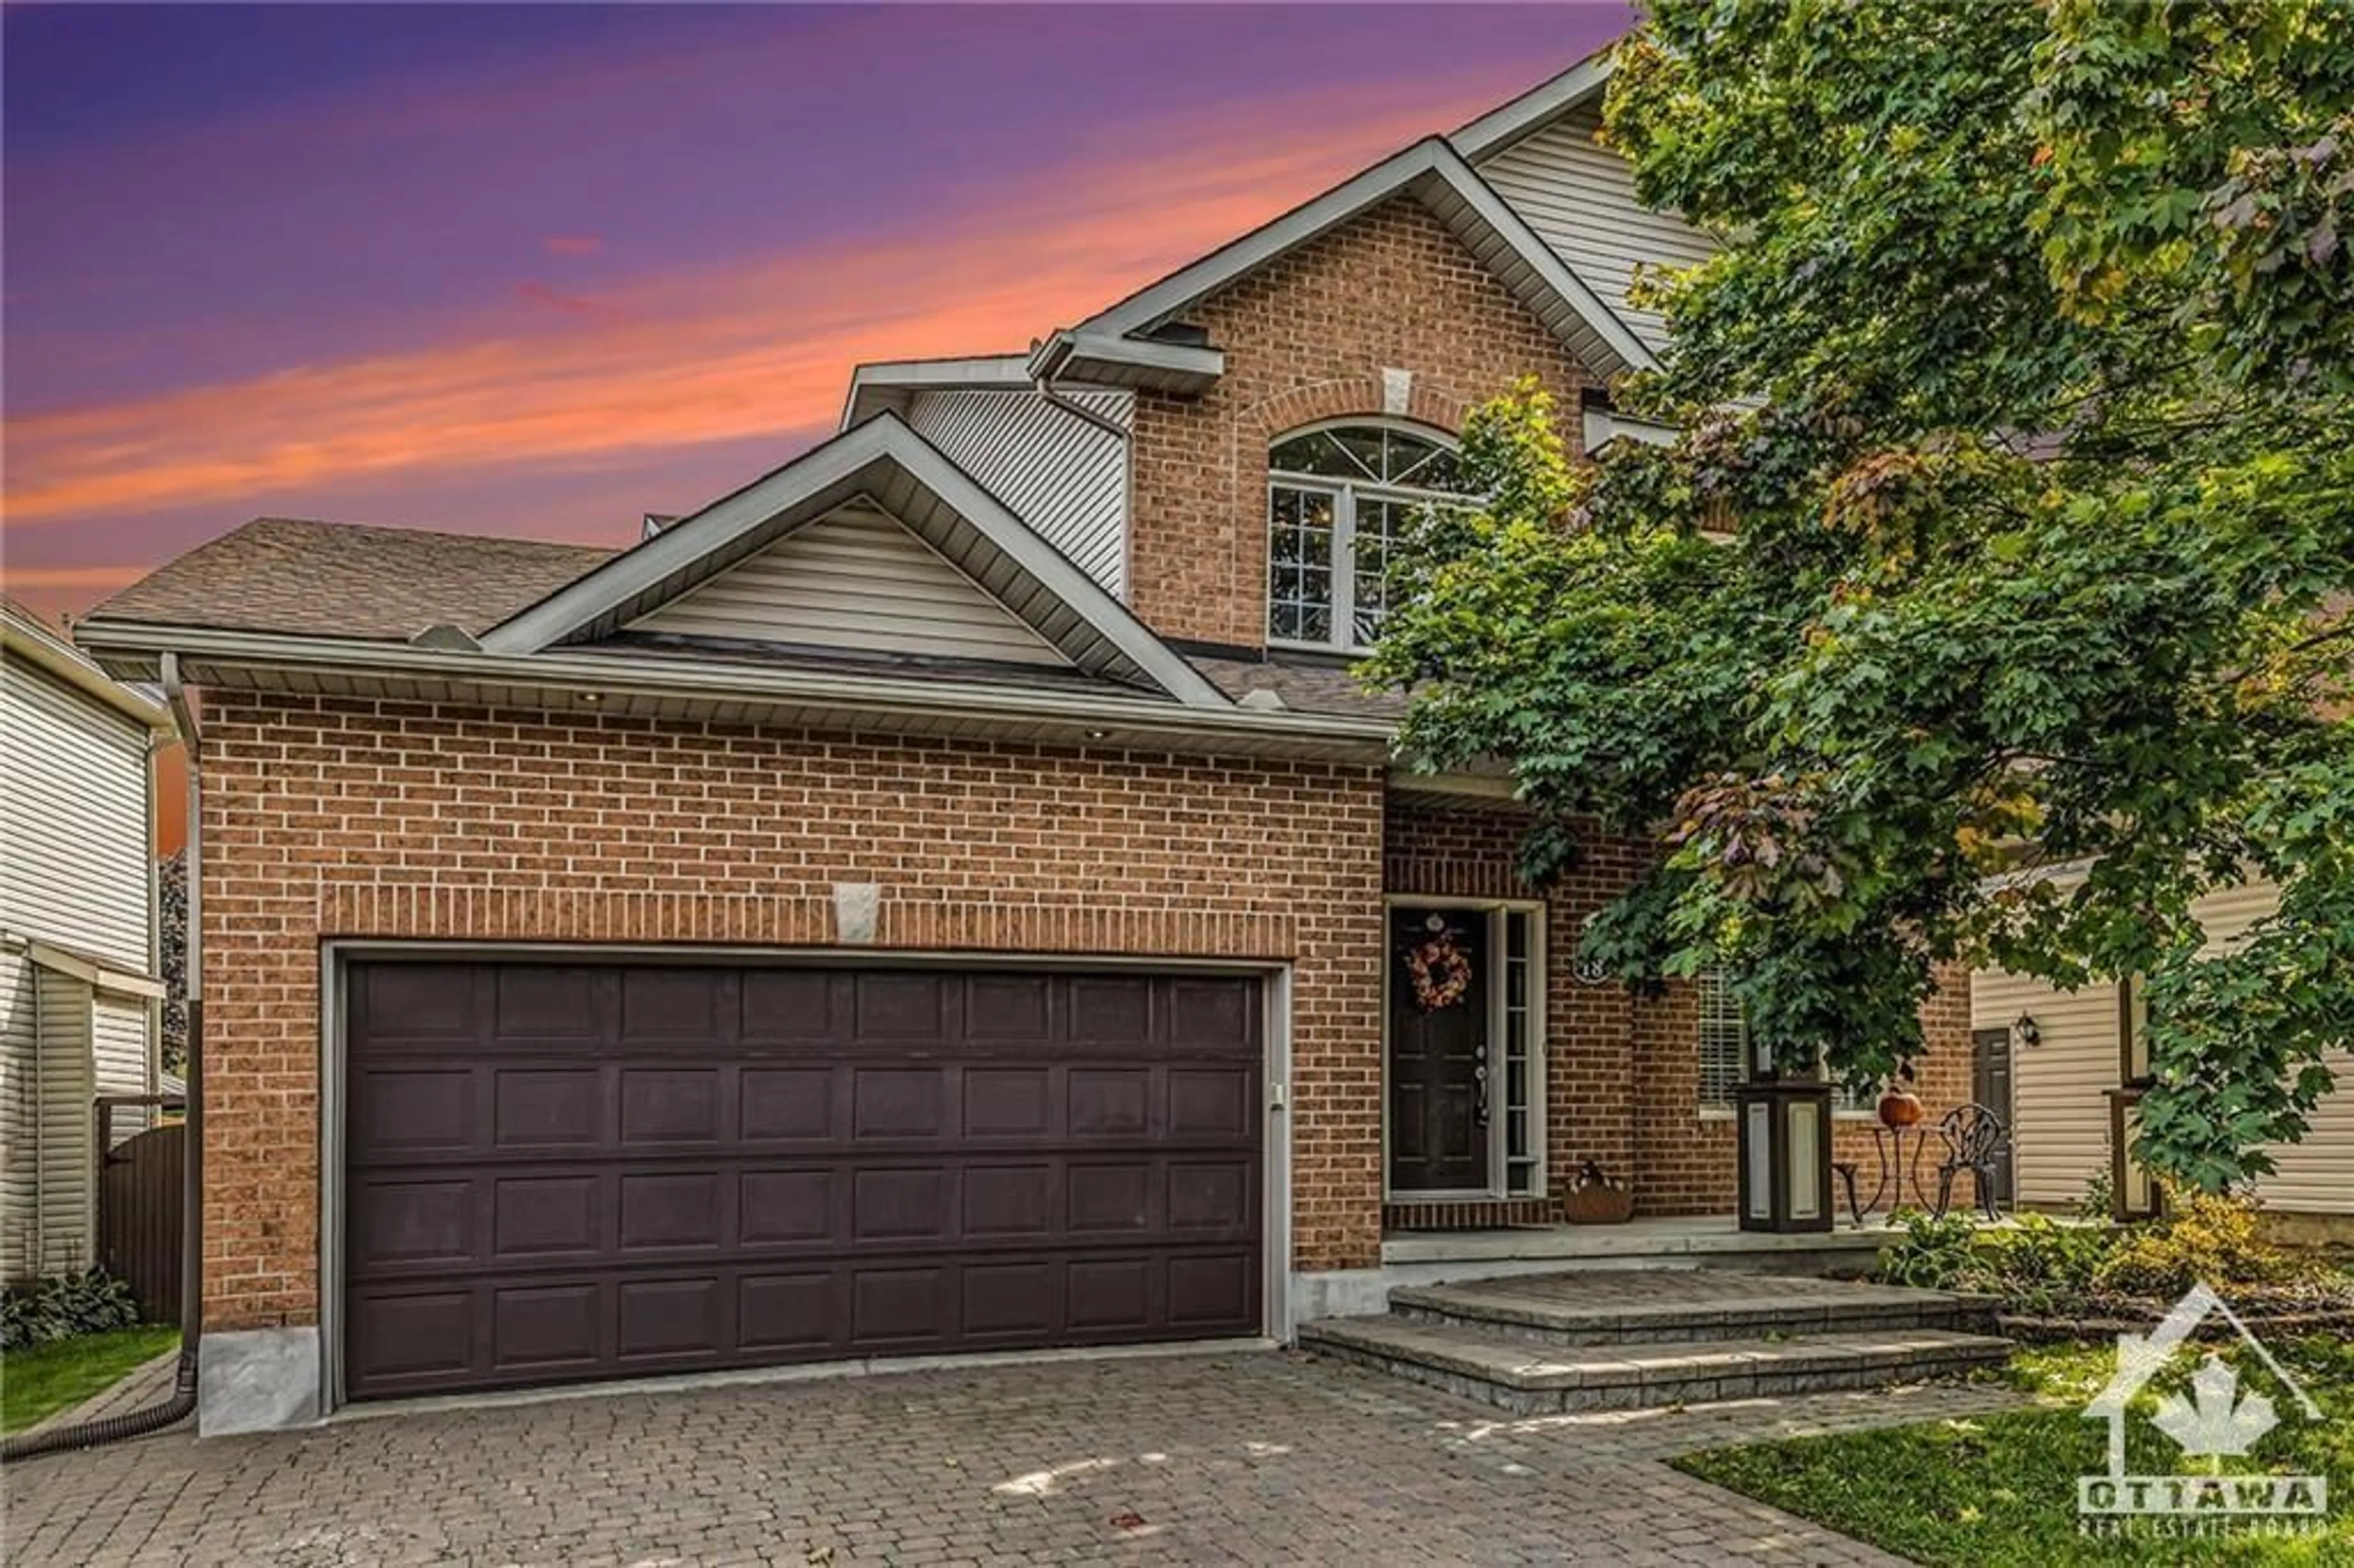 Home with brick exterior material for 18 HARRY DOUGLAS Dr, Ottawa Ontario K2S 1Z2